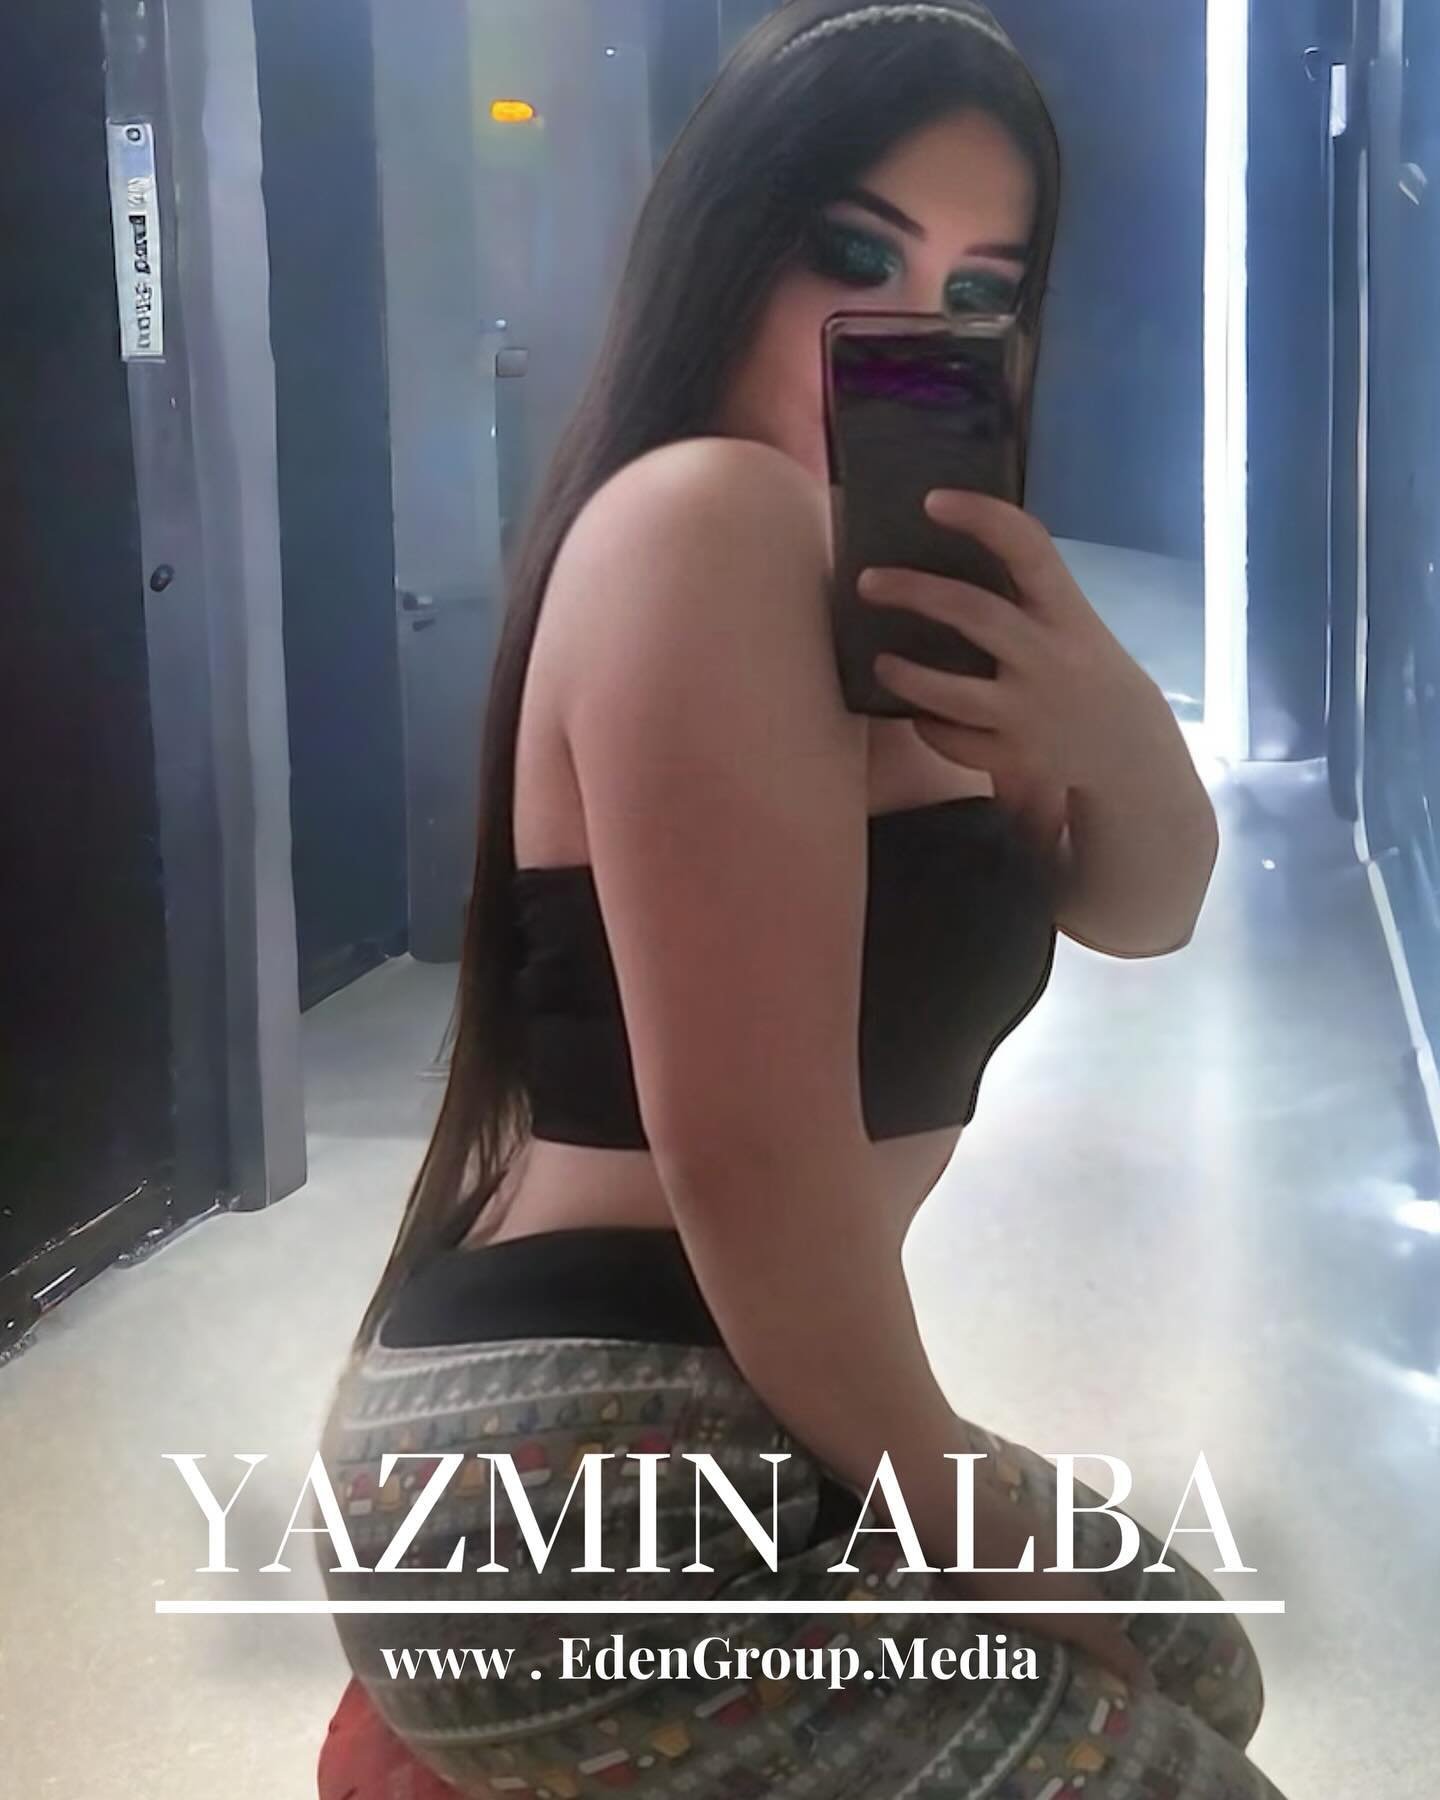 @_dollykush 
&ldquo;Meet the stunning Yazmin Alba, a true embodiment of strength and resilience. She reminds us all to never let anyone bring our dreams down, for those who do are simply envious of our light. Yazmin radiates natural beauty and joy fo